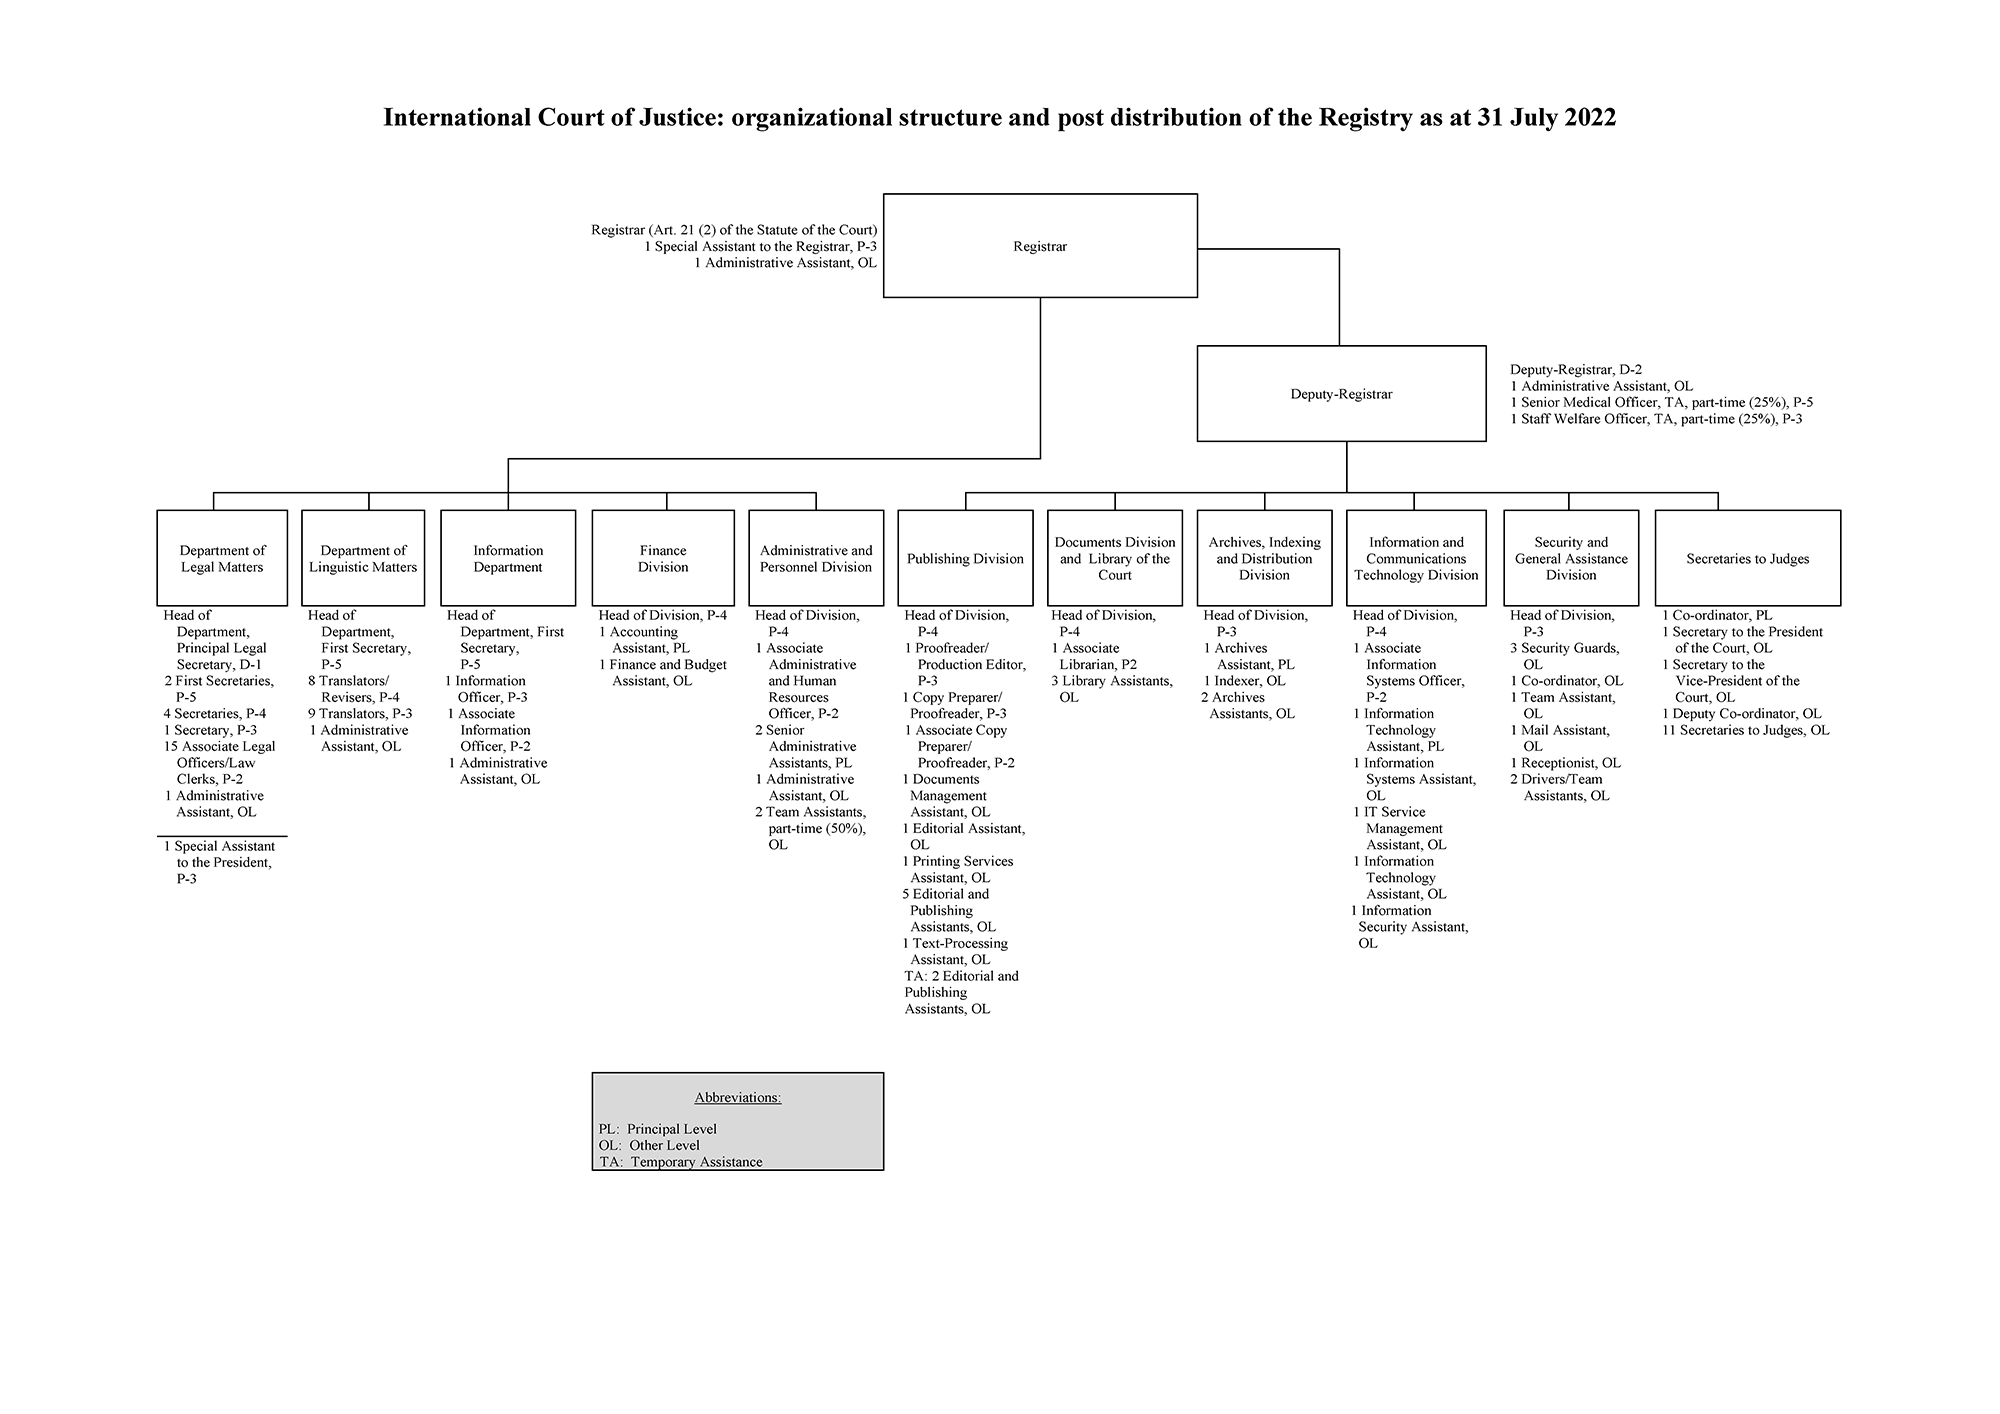 International Court of Justice: Organizational structure and post distribution of the Registry as at 31 July 2022